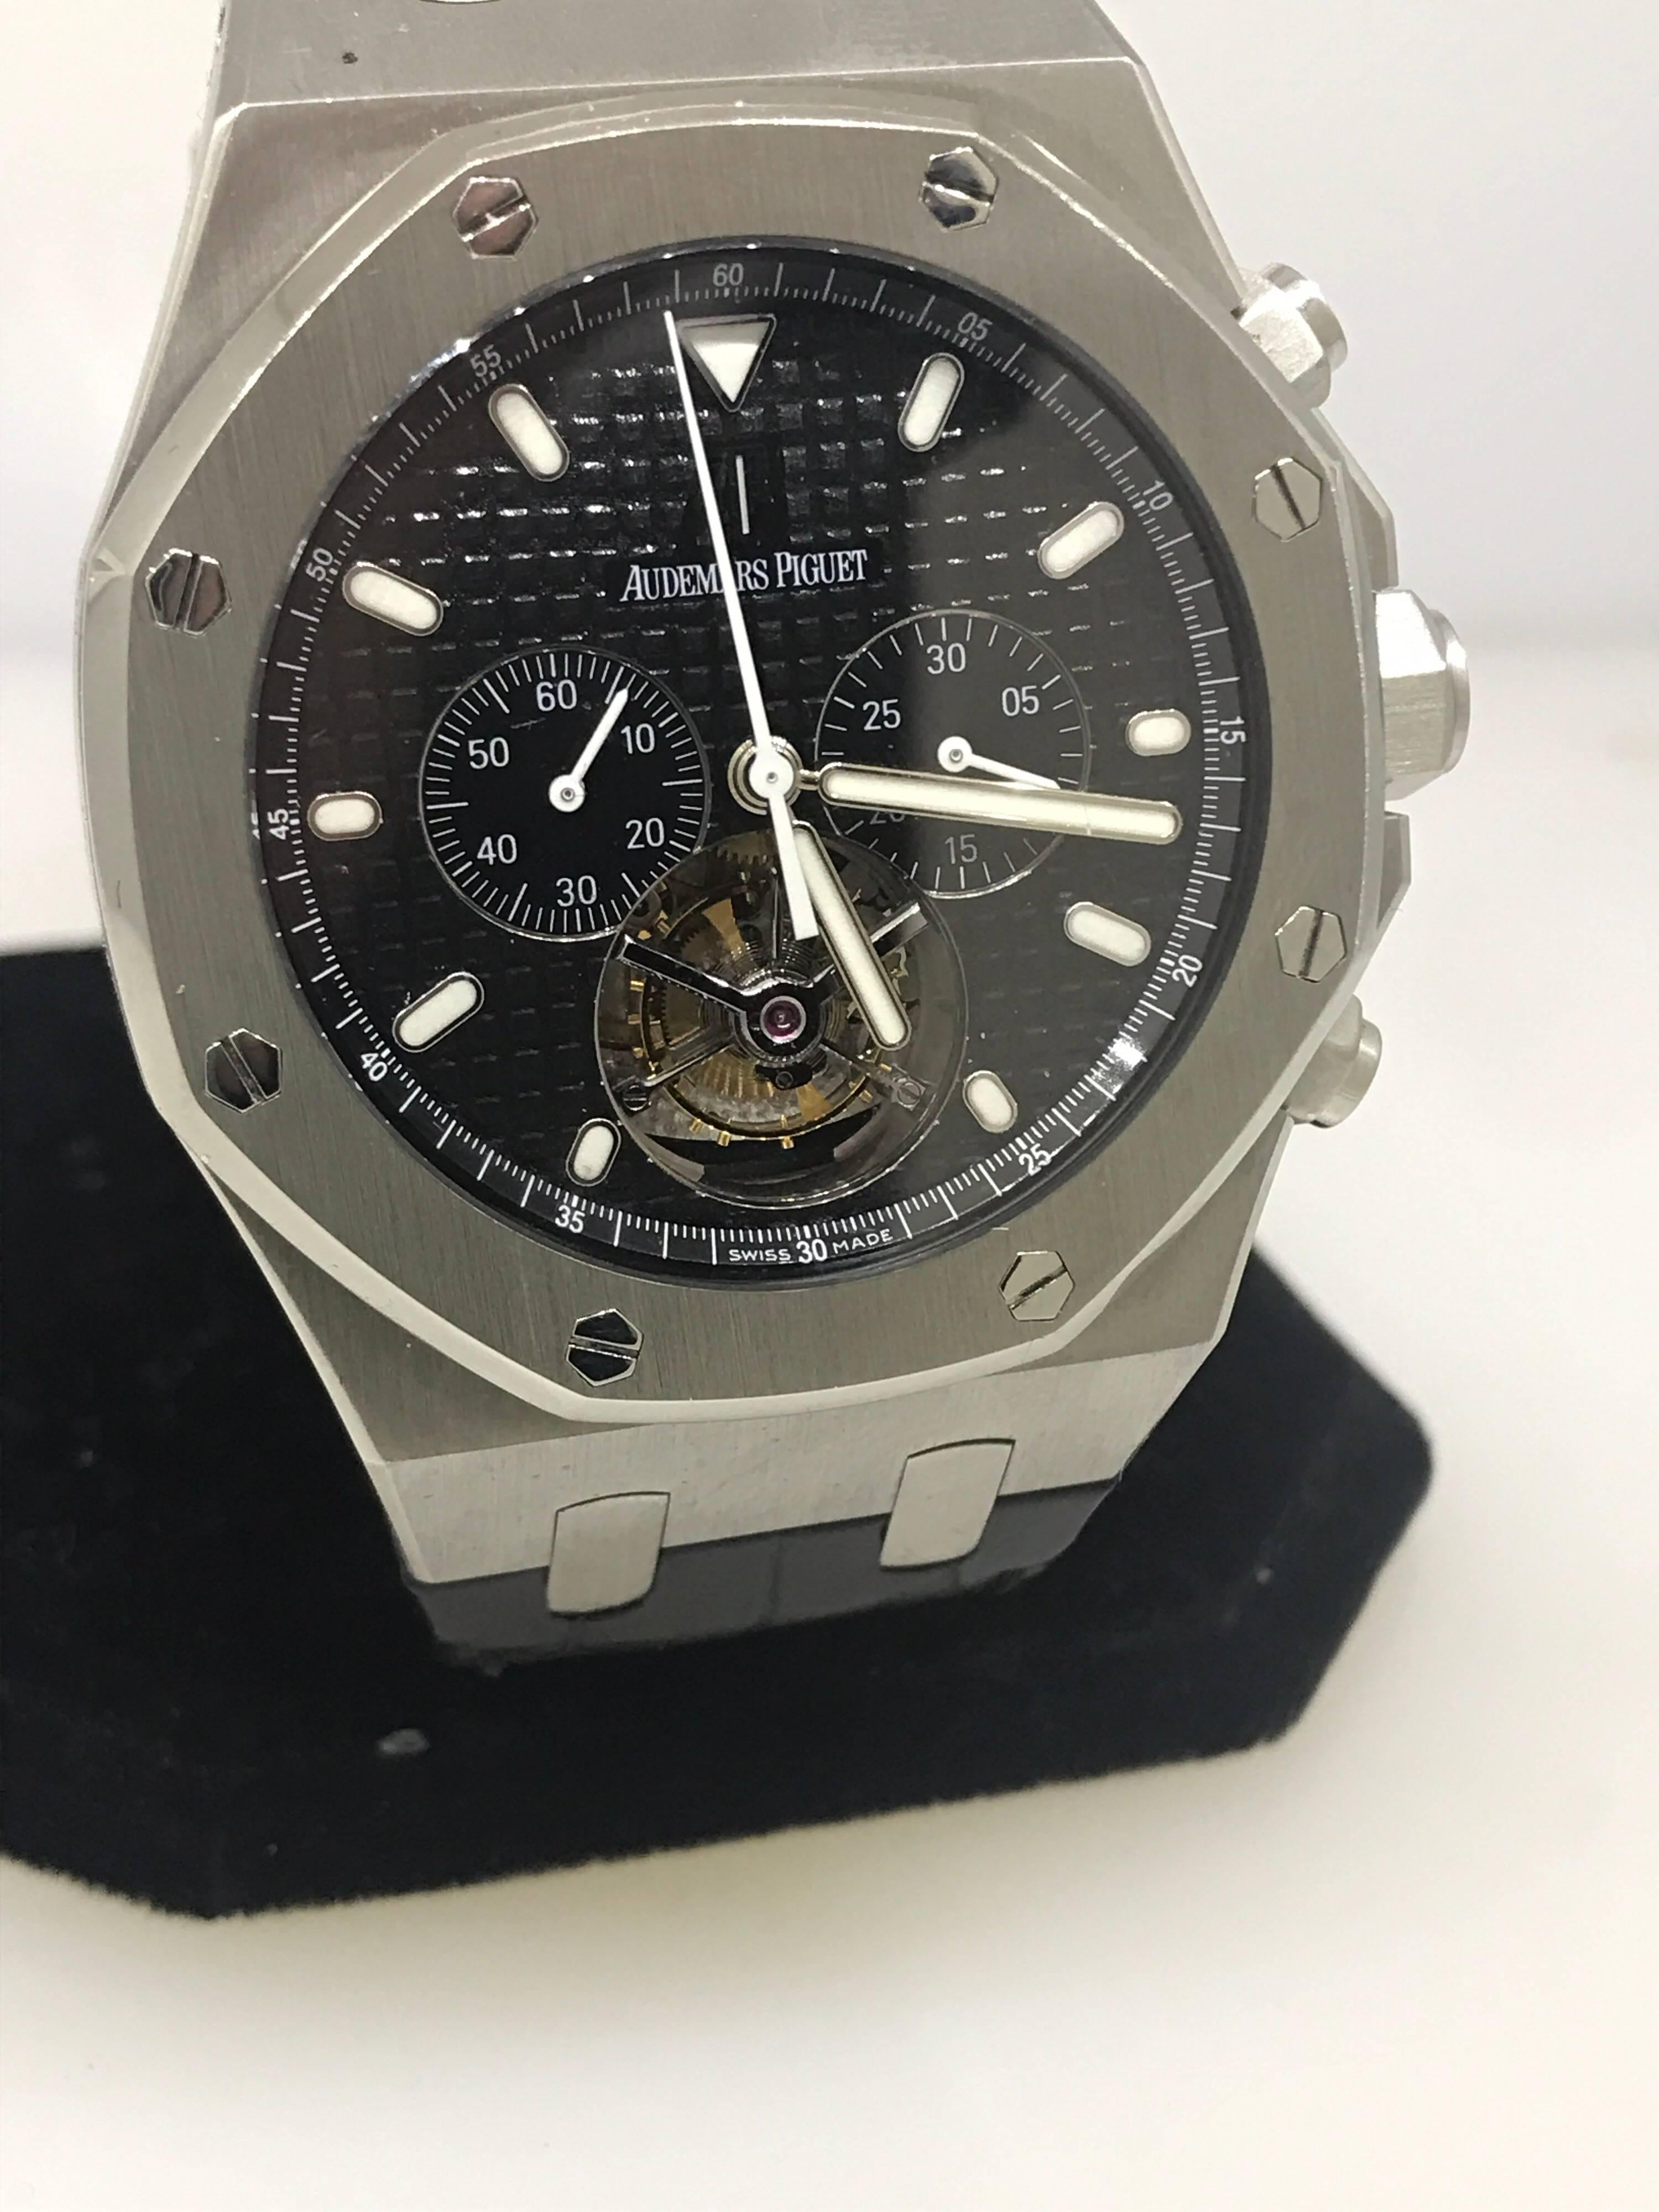 Audemars Piguet Royal Oak Tourbillon Chronograph Mens Watch 25977ST.OO.1205ST.02 In Excellent Condition For Sale In New York, NY